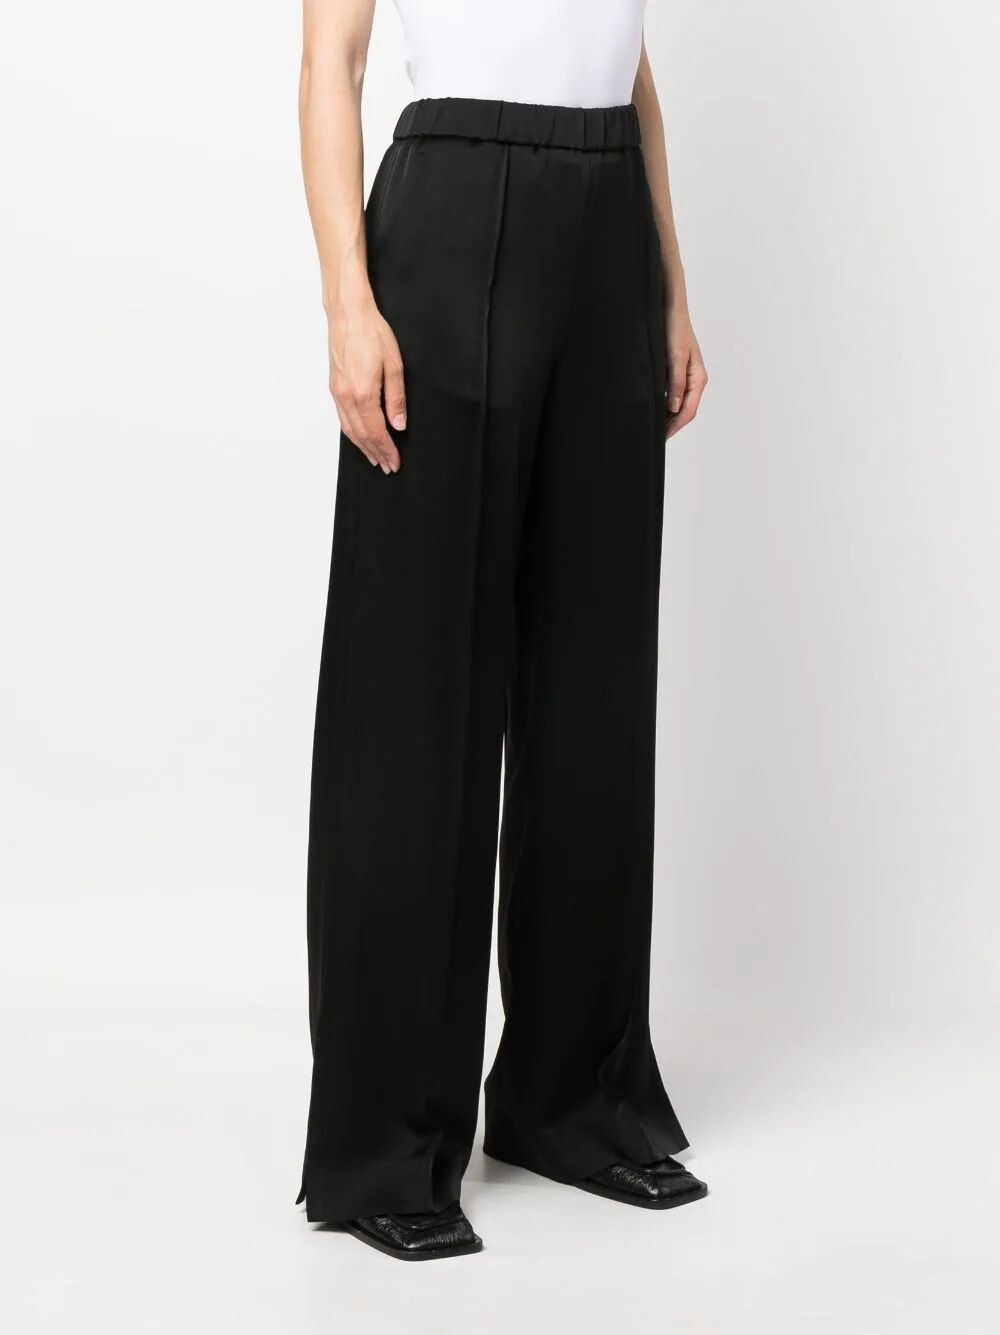 05 Aw 30 Relaxed Trousers